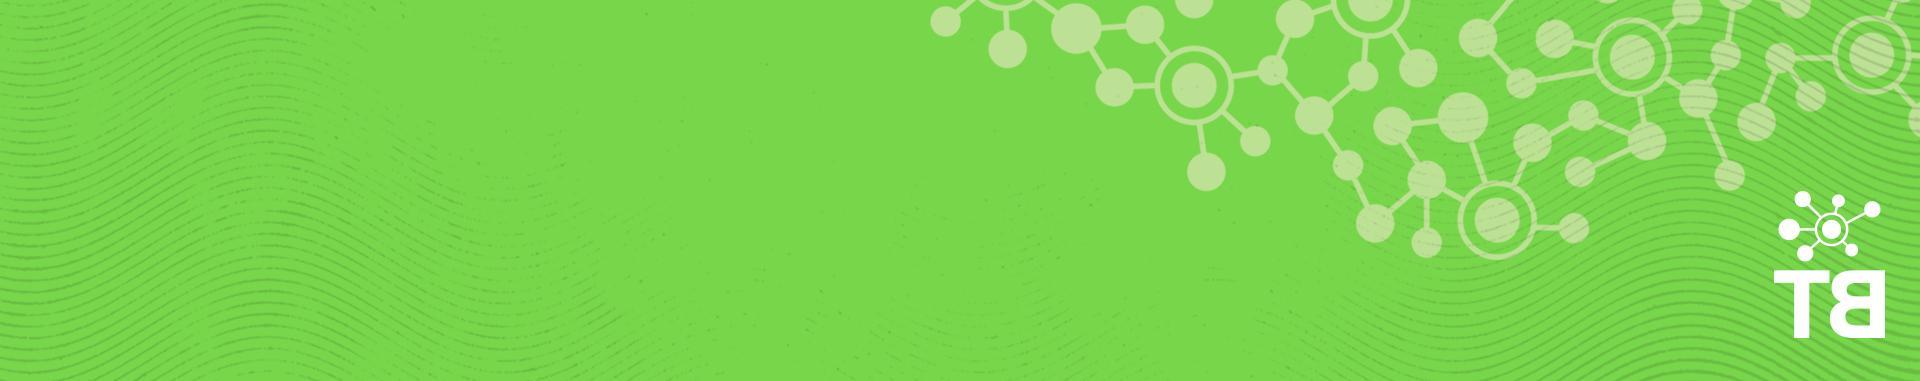 Panoramic green color bar with 更好的在一起 connection design and BT logo at top left